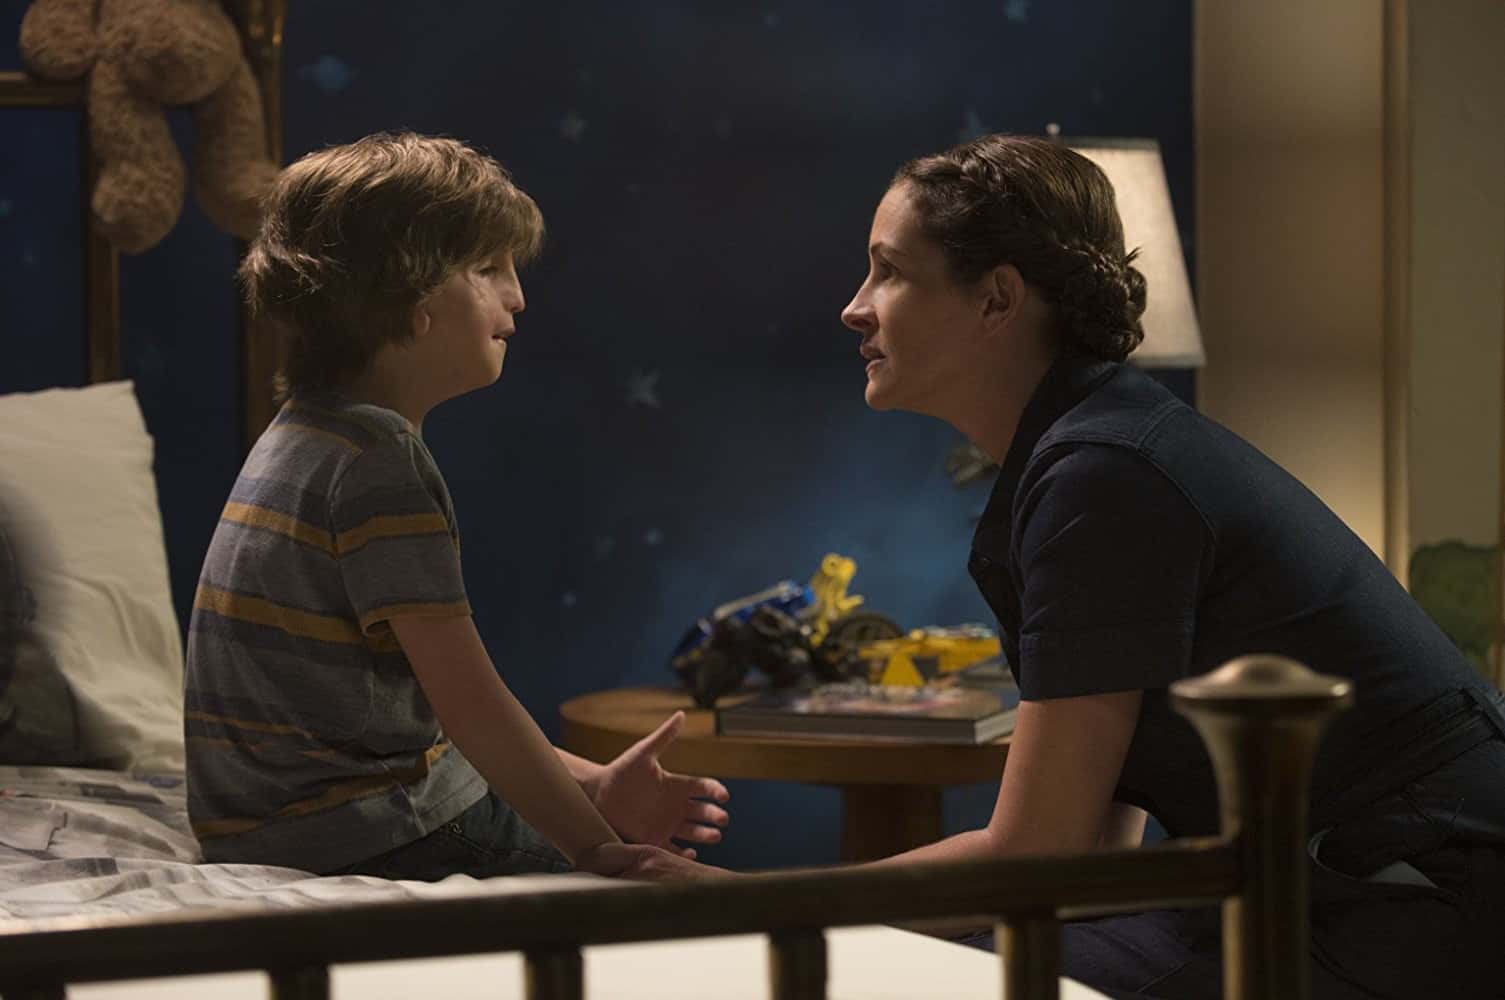 Actor Jacob Tremblay as August Pullman is sitting on his bed while Julia Roberts, who plays his mother Isabel Pullman, kneels down to speak to him 